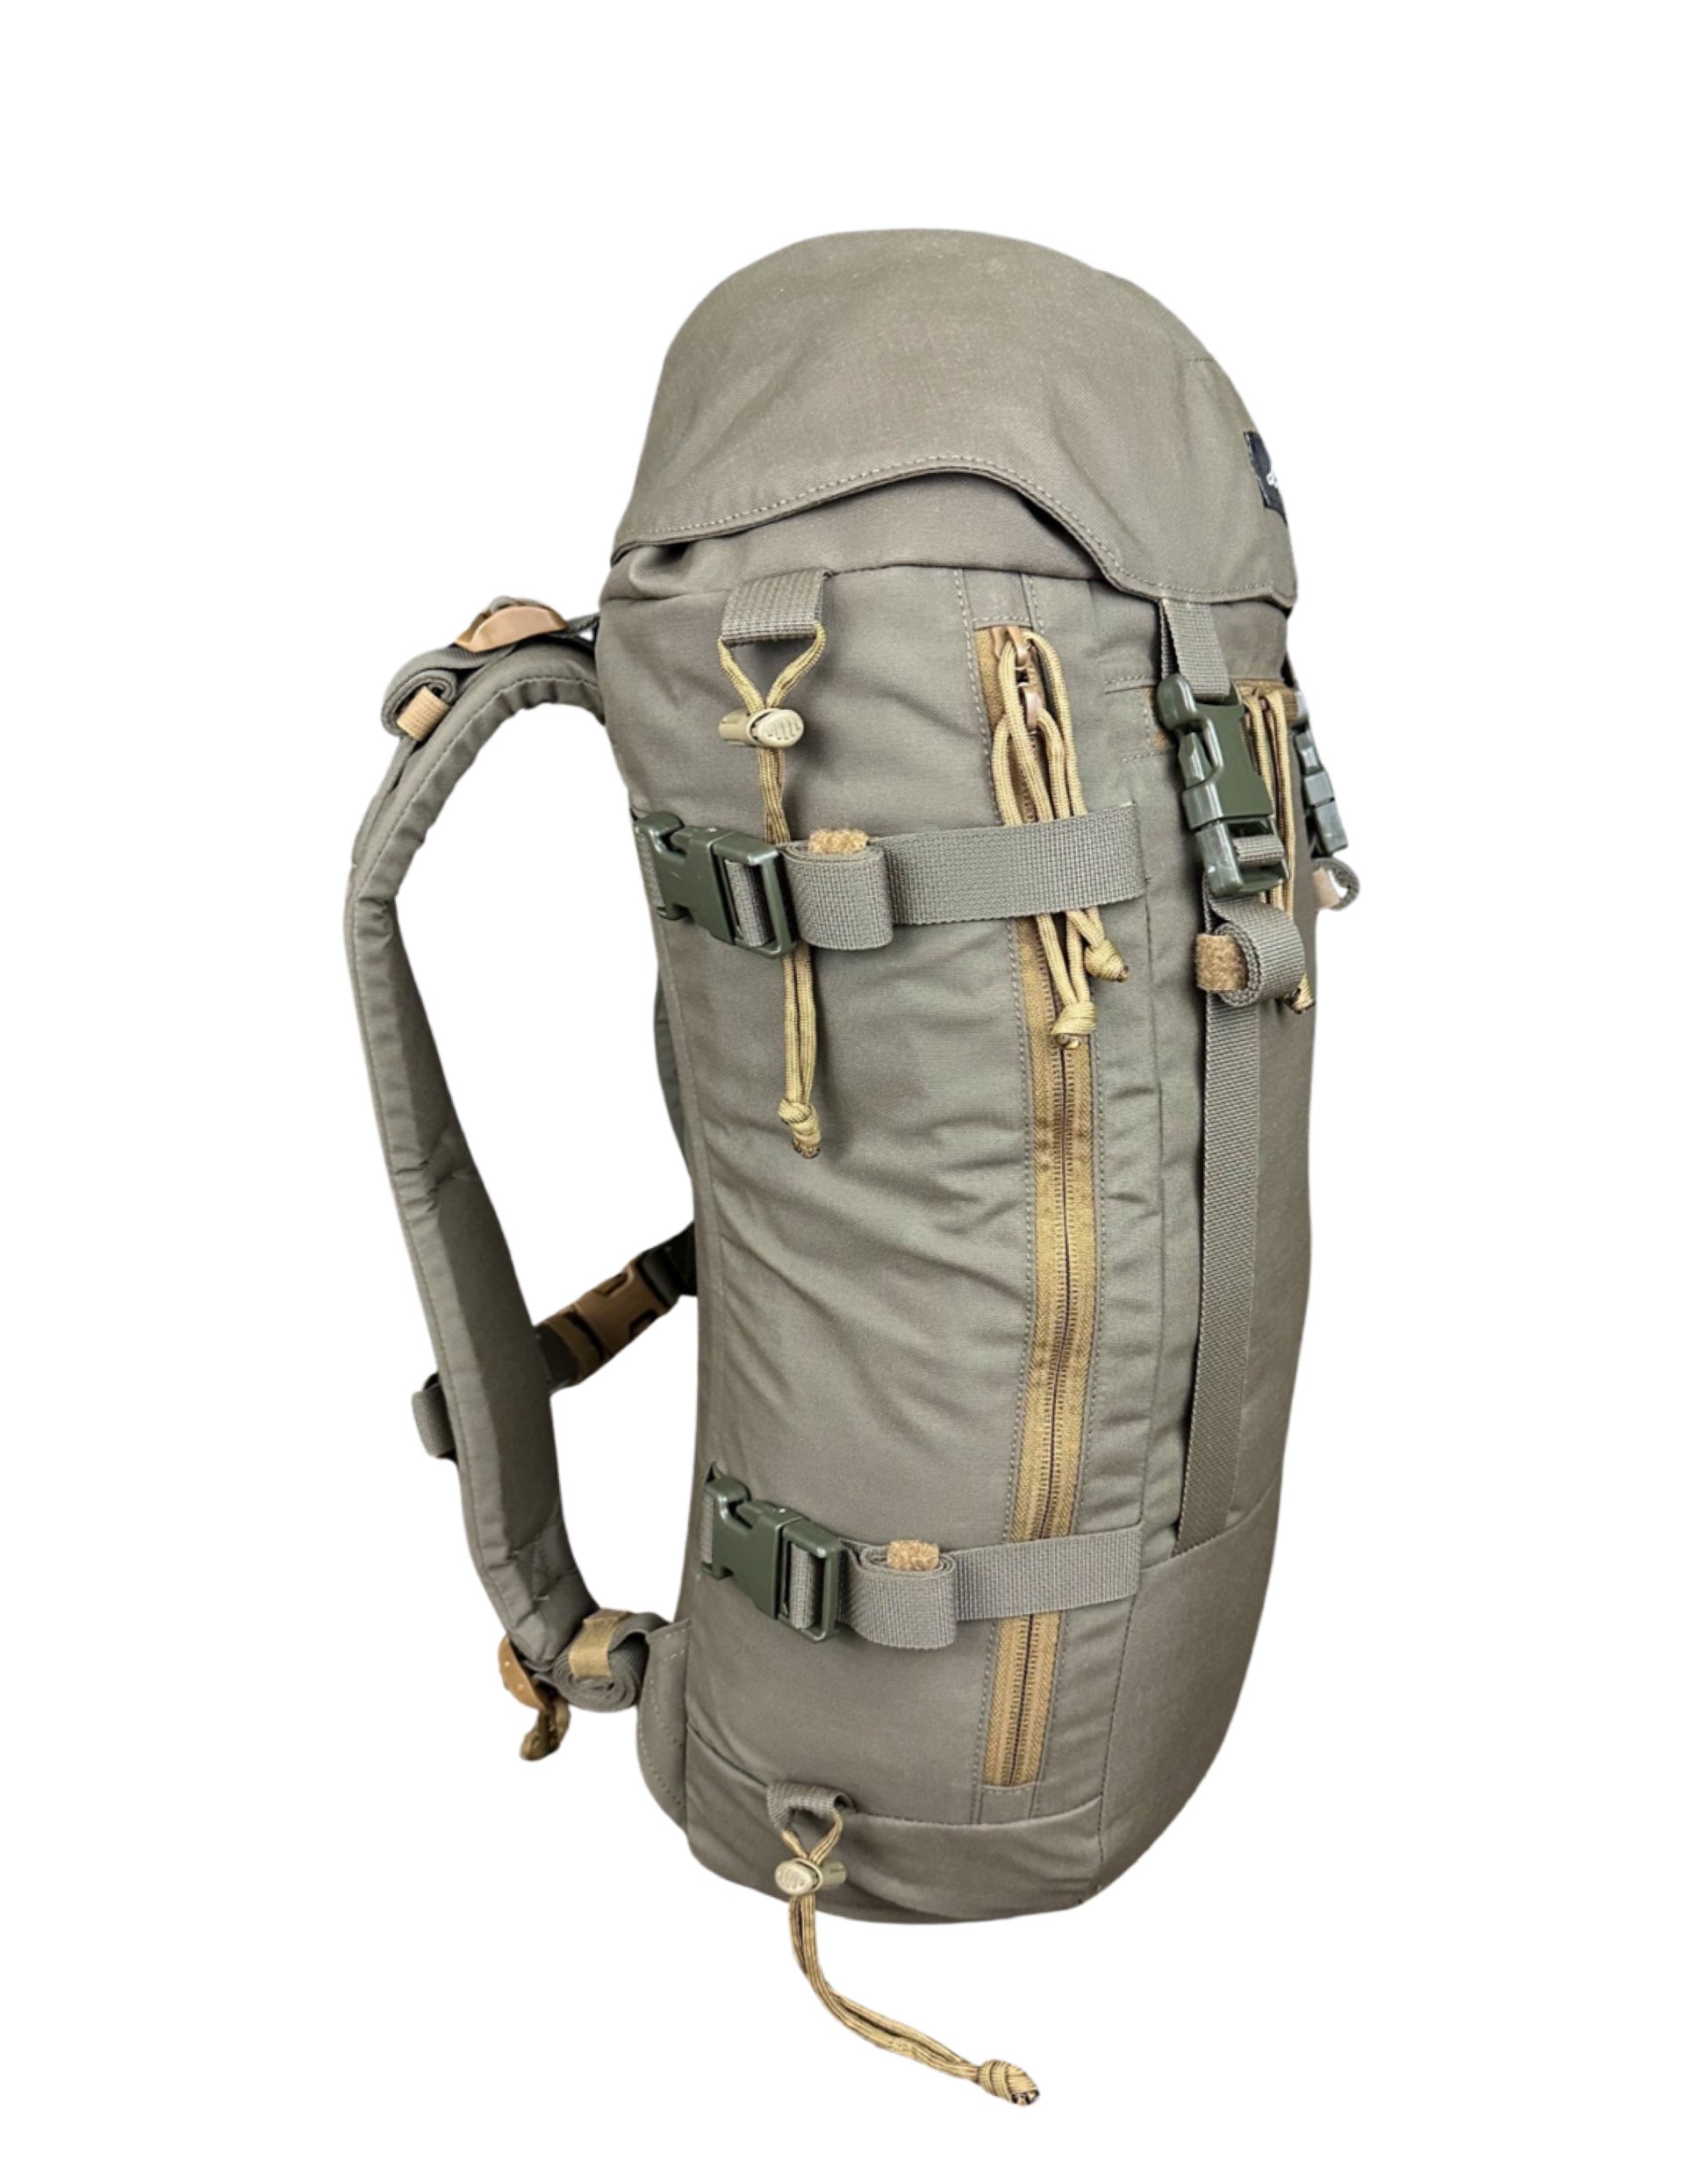 Ruckmule gunner mountain hiking hunting scouting backpack side view 